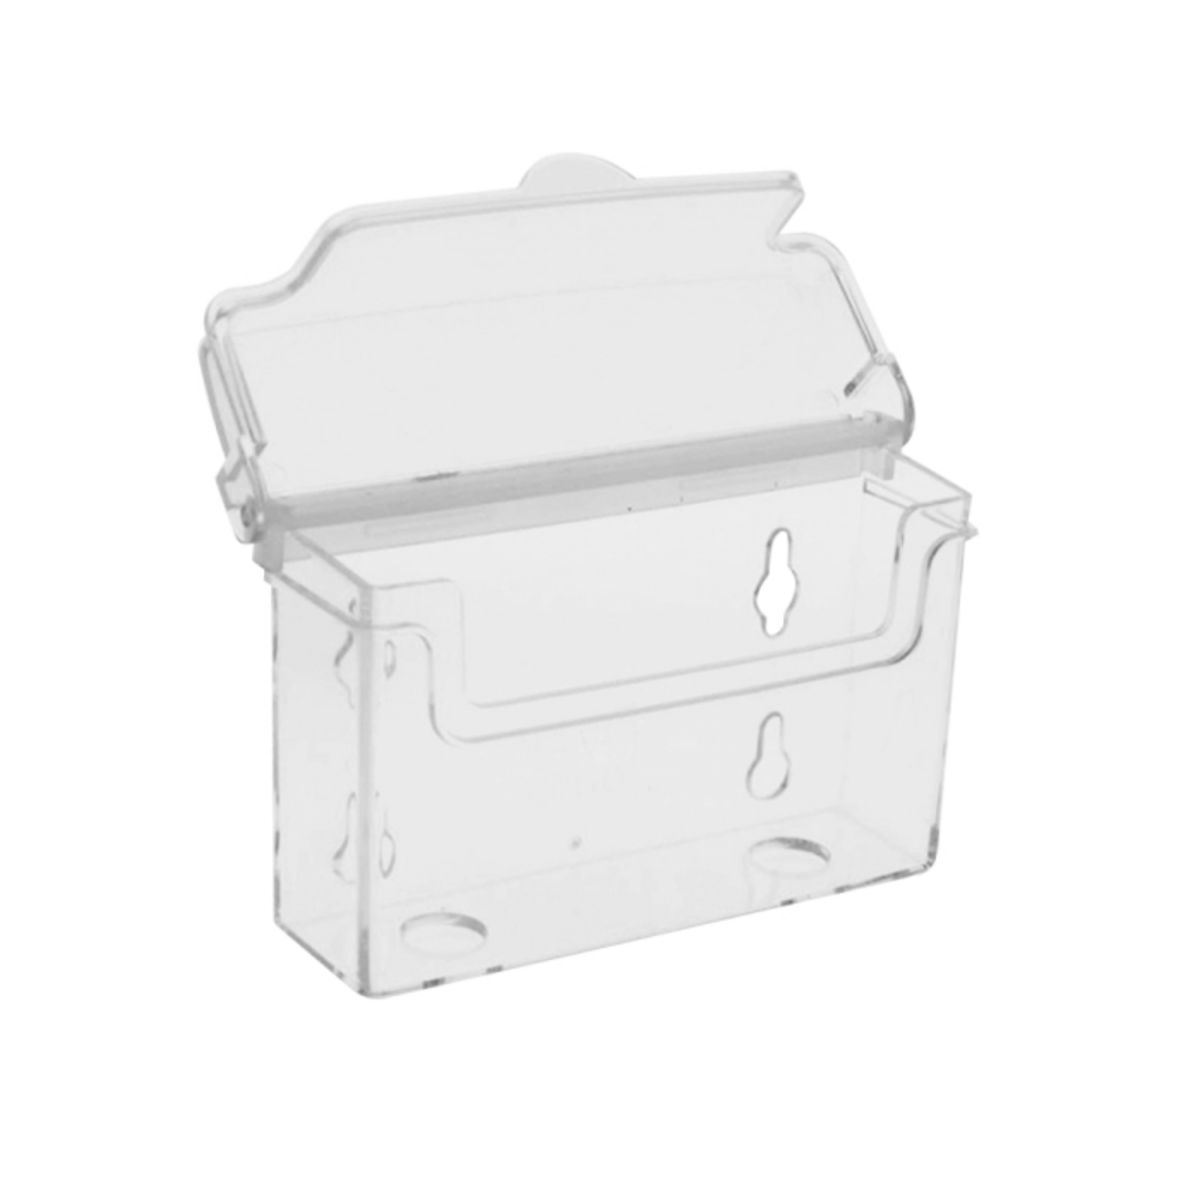 Business card dispenser with lid.png